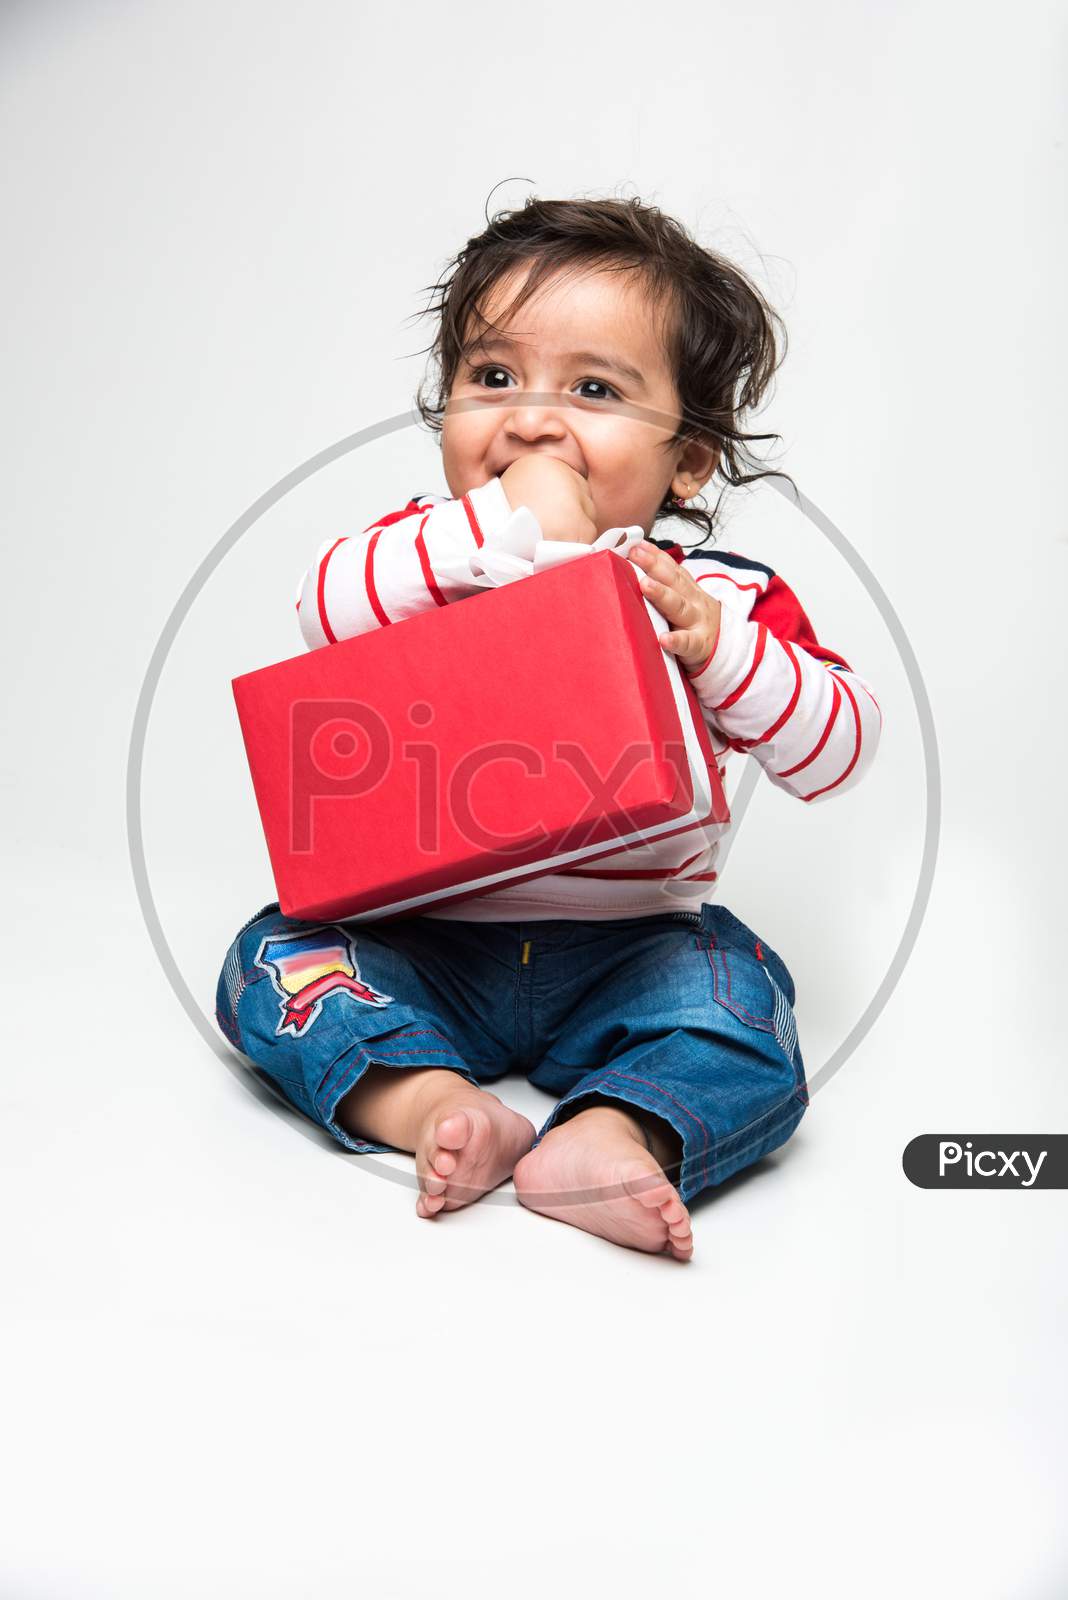 Indian cute little baby /infant or toddler smiling with gift box over white background